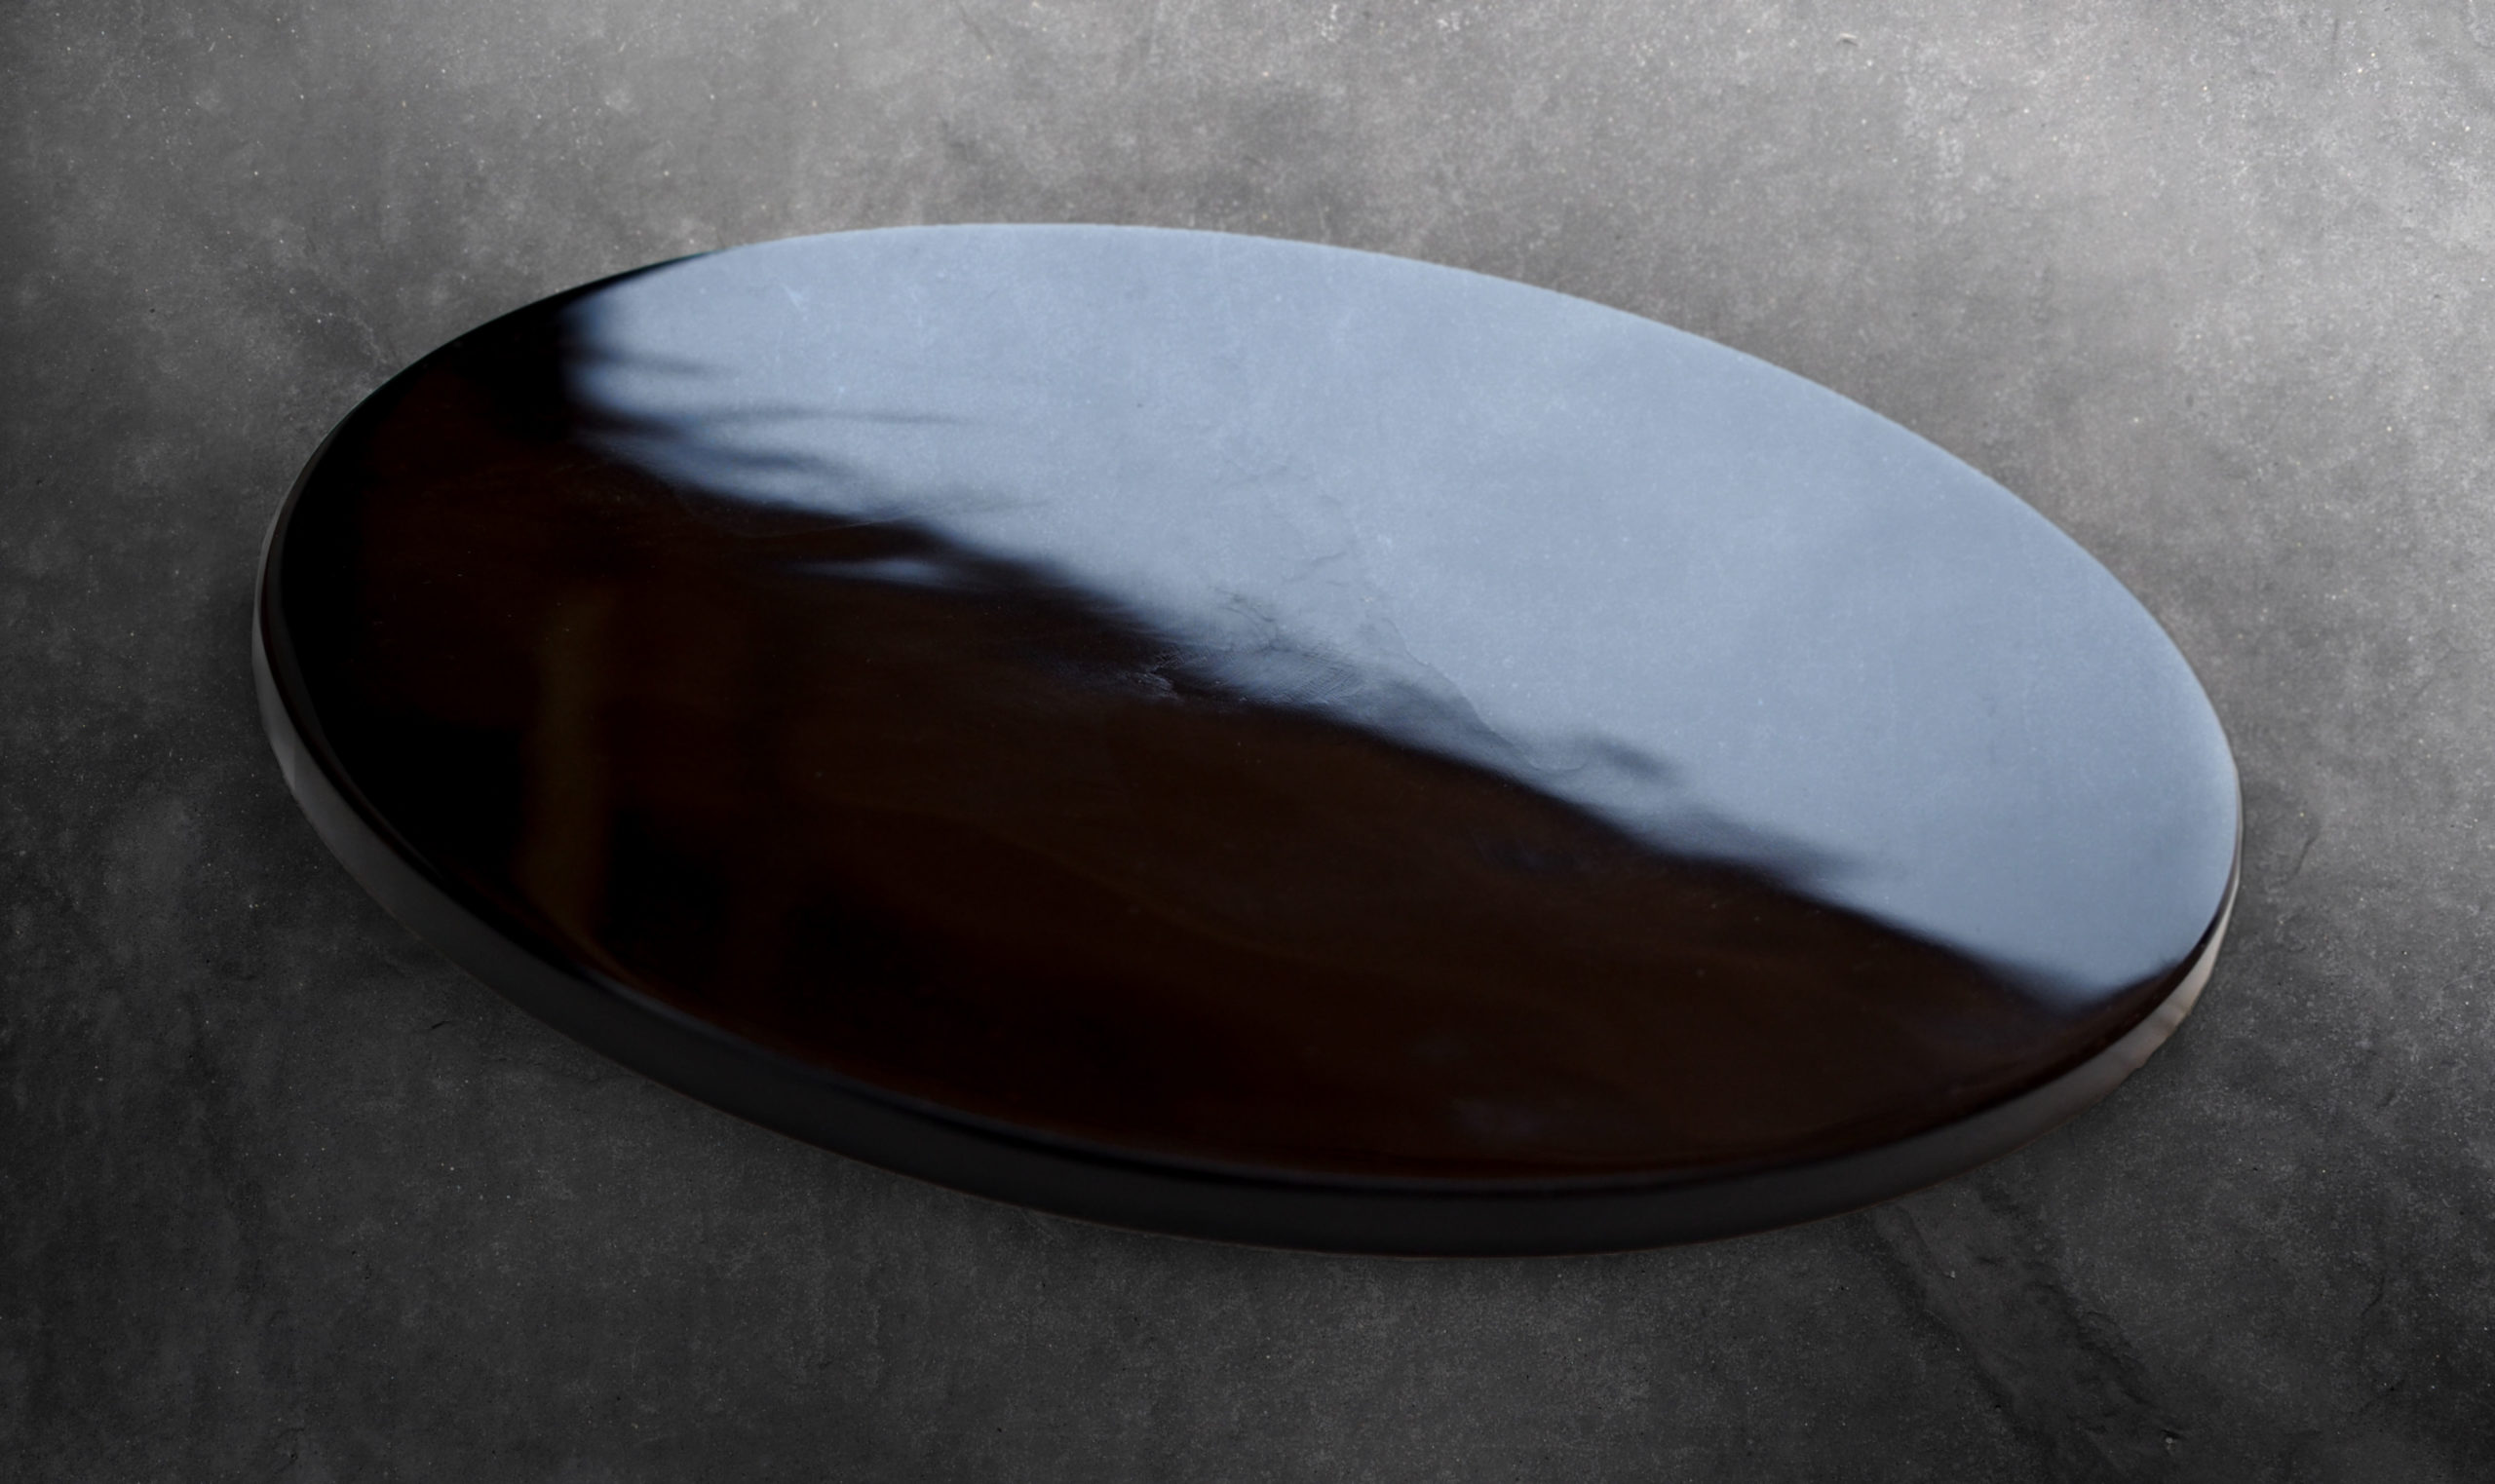 A piece of obsidian on a natural background.